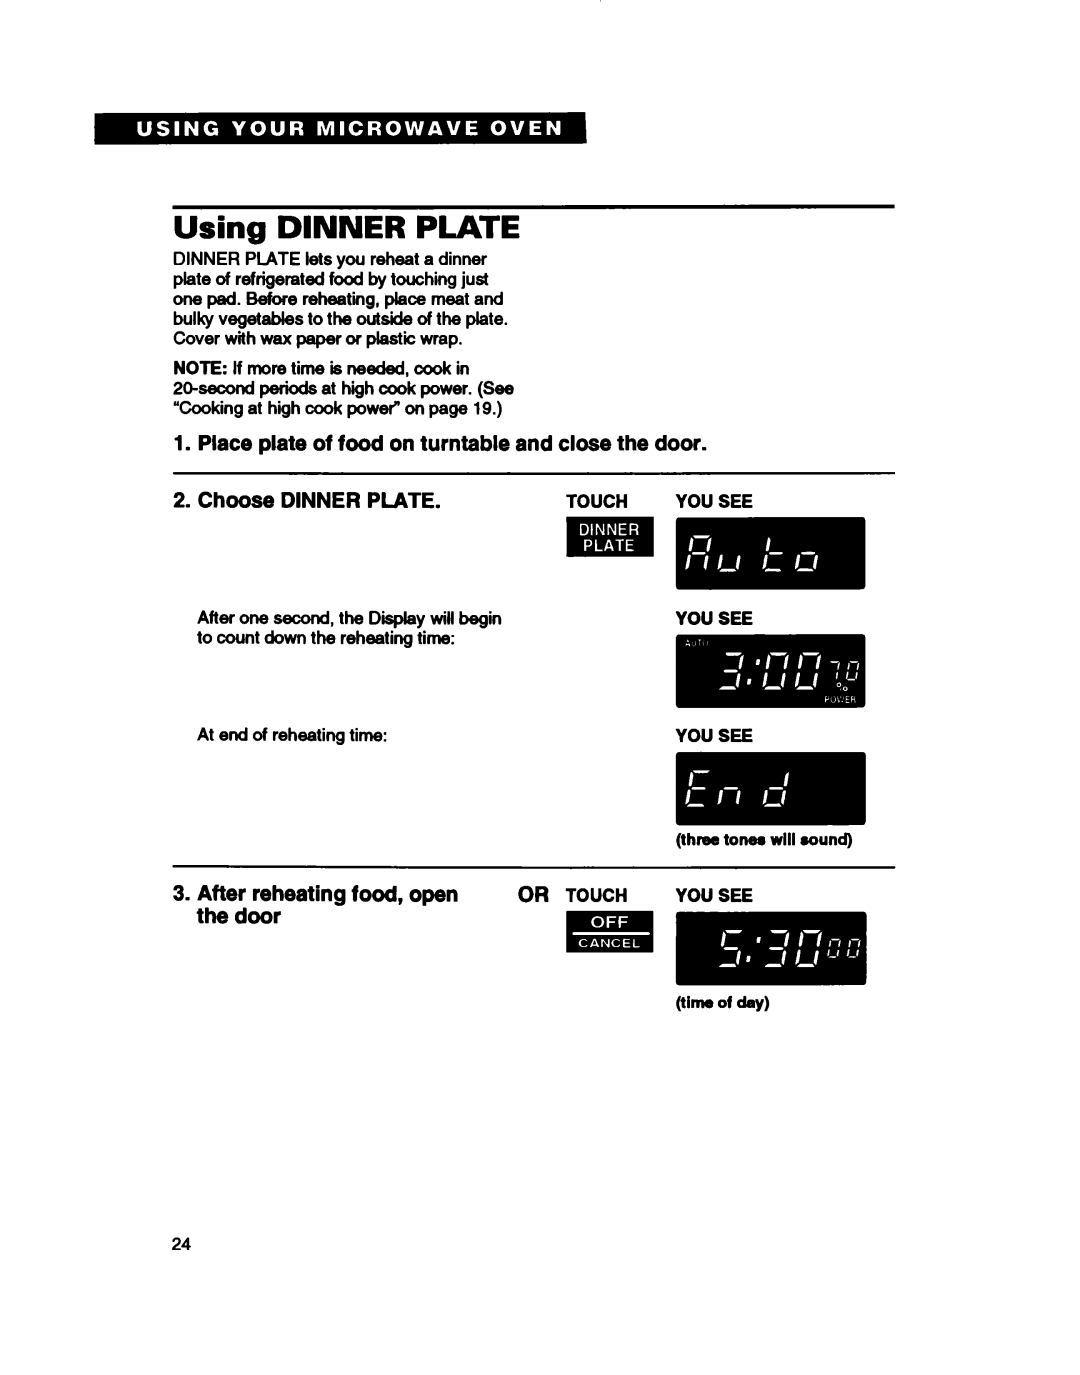 Whirlpool MT411IXB, MT2081XB warranty Using DINNER PLATE, Choose DINNER PLATE, After reheating food, open the door 